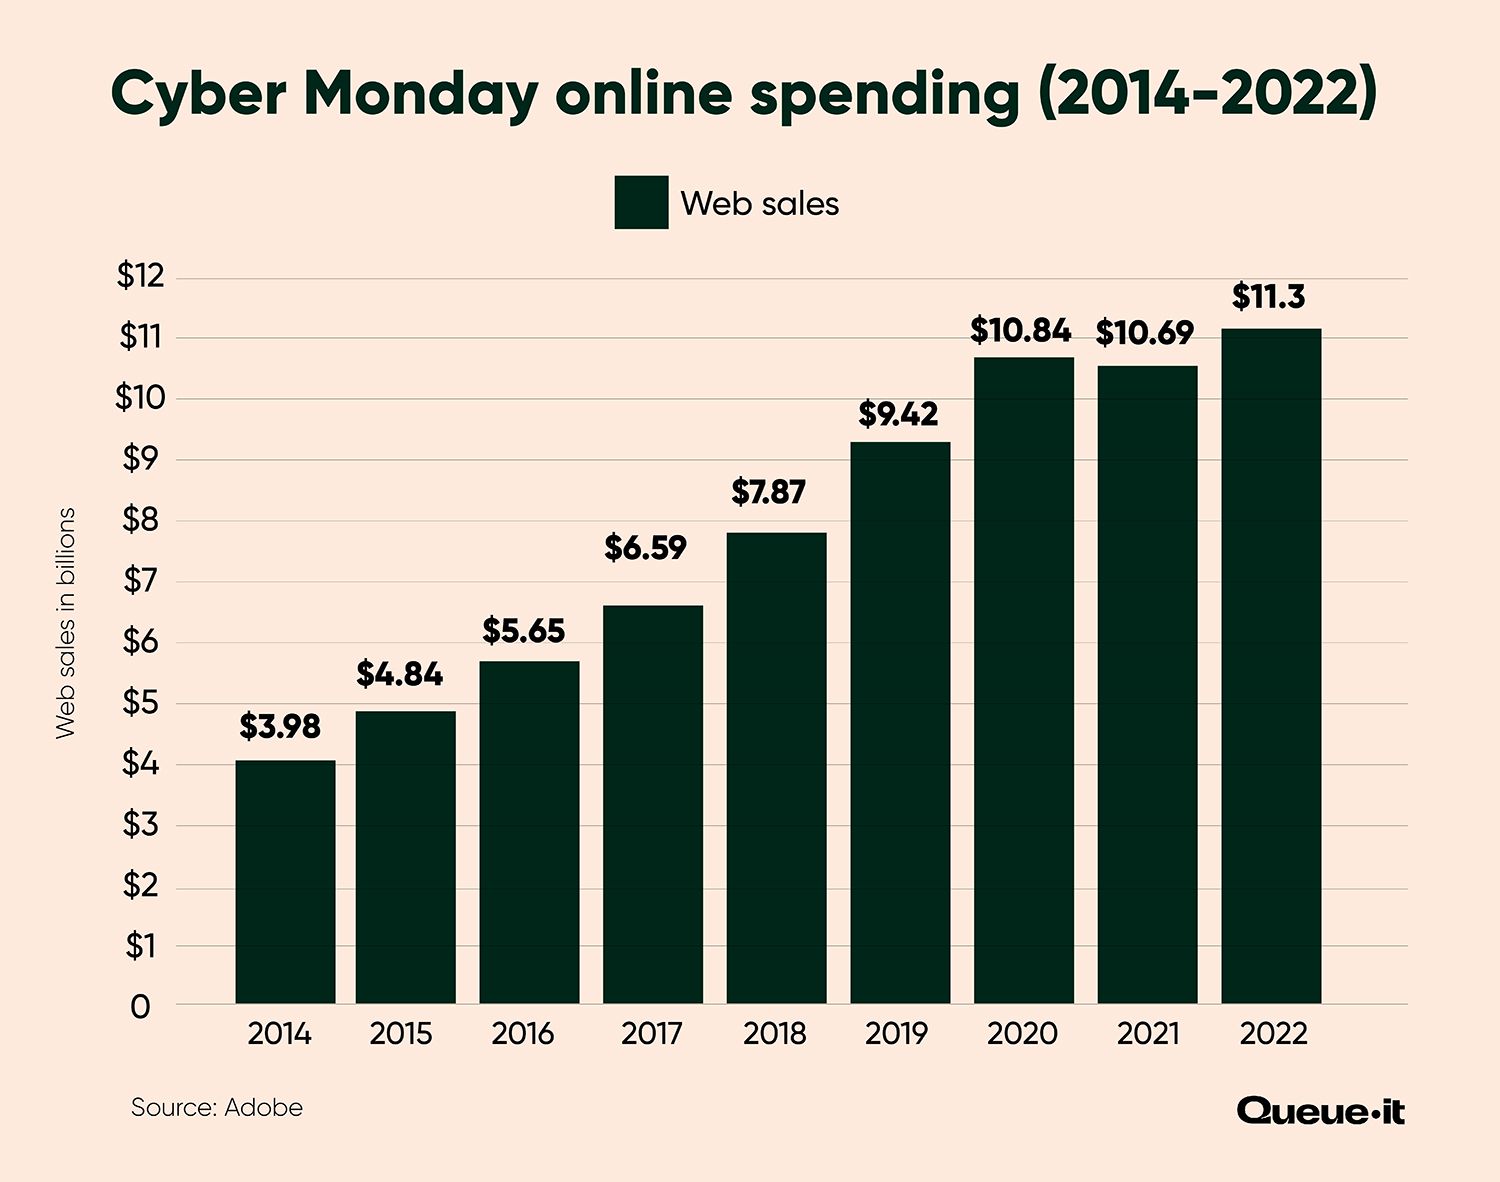 Cyber Monday ecommerce sales growth